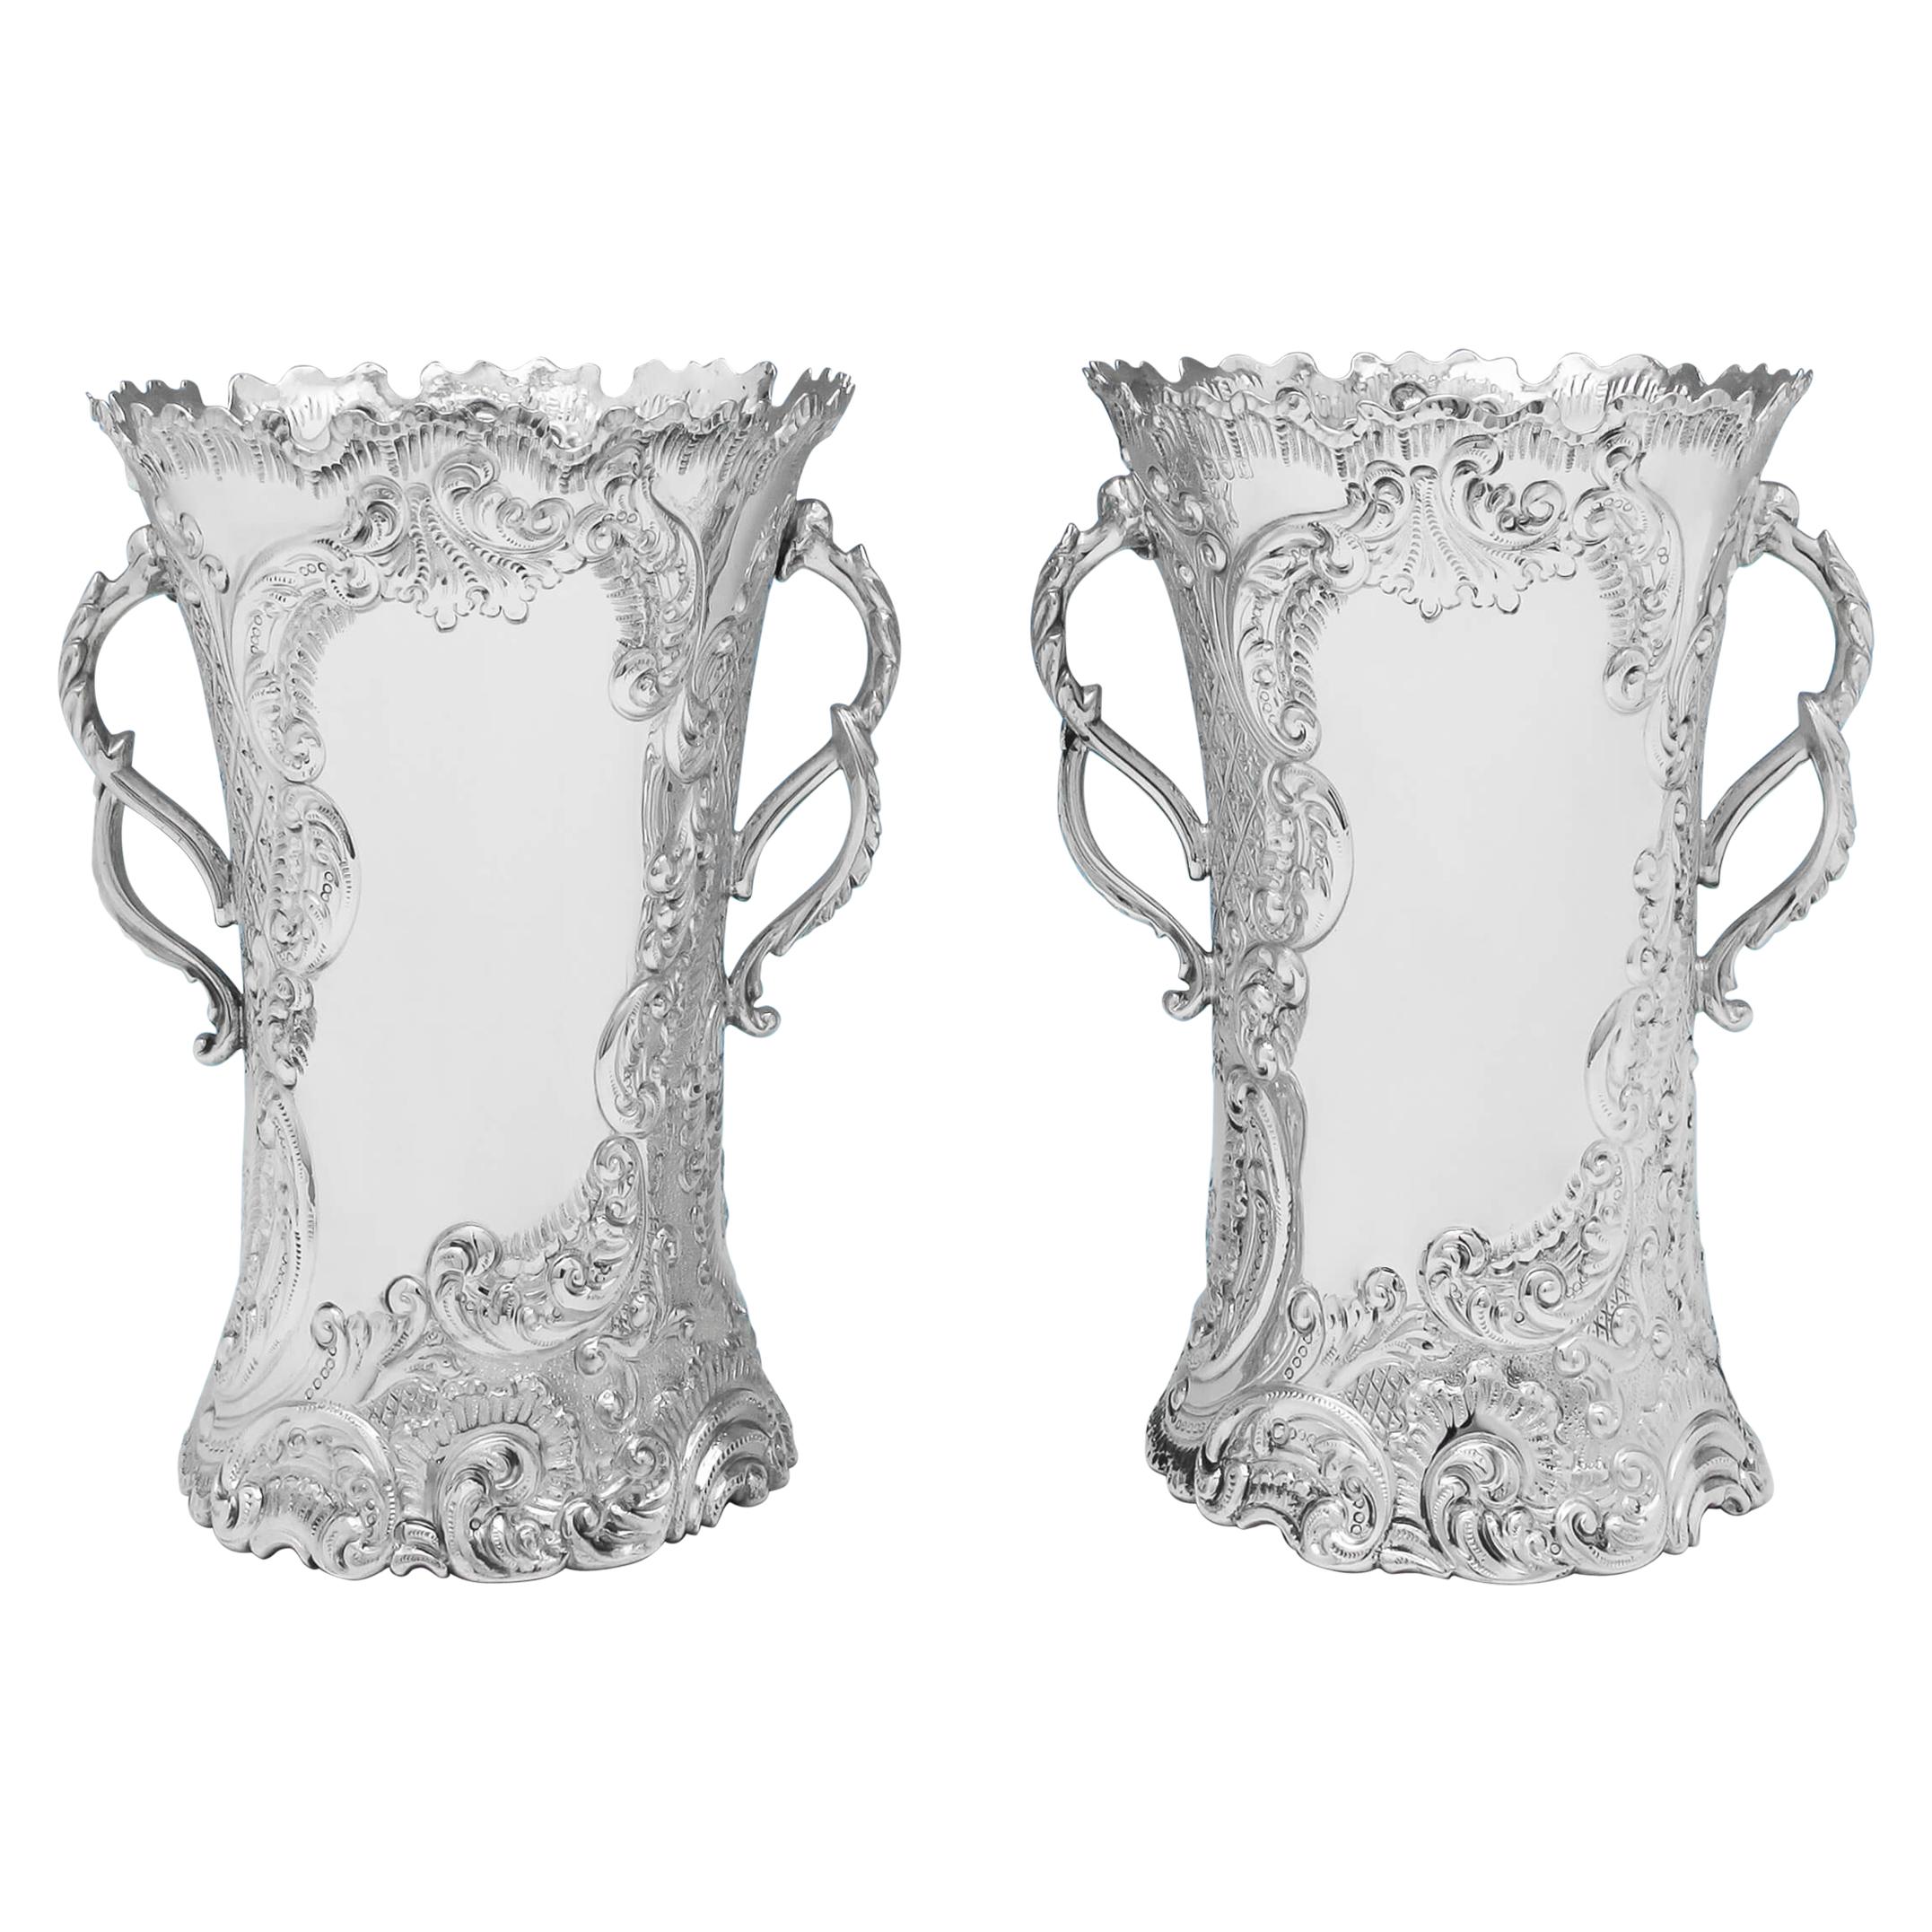 Art Nouveau Period Sterling Silver Pair of Vases from 1901 by Martin & Hall